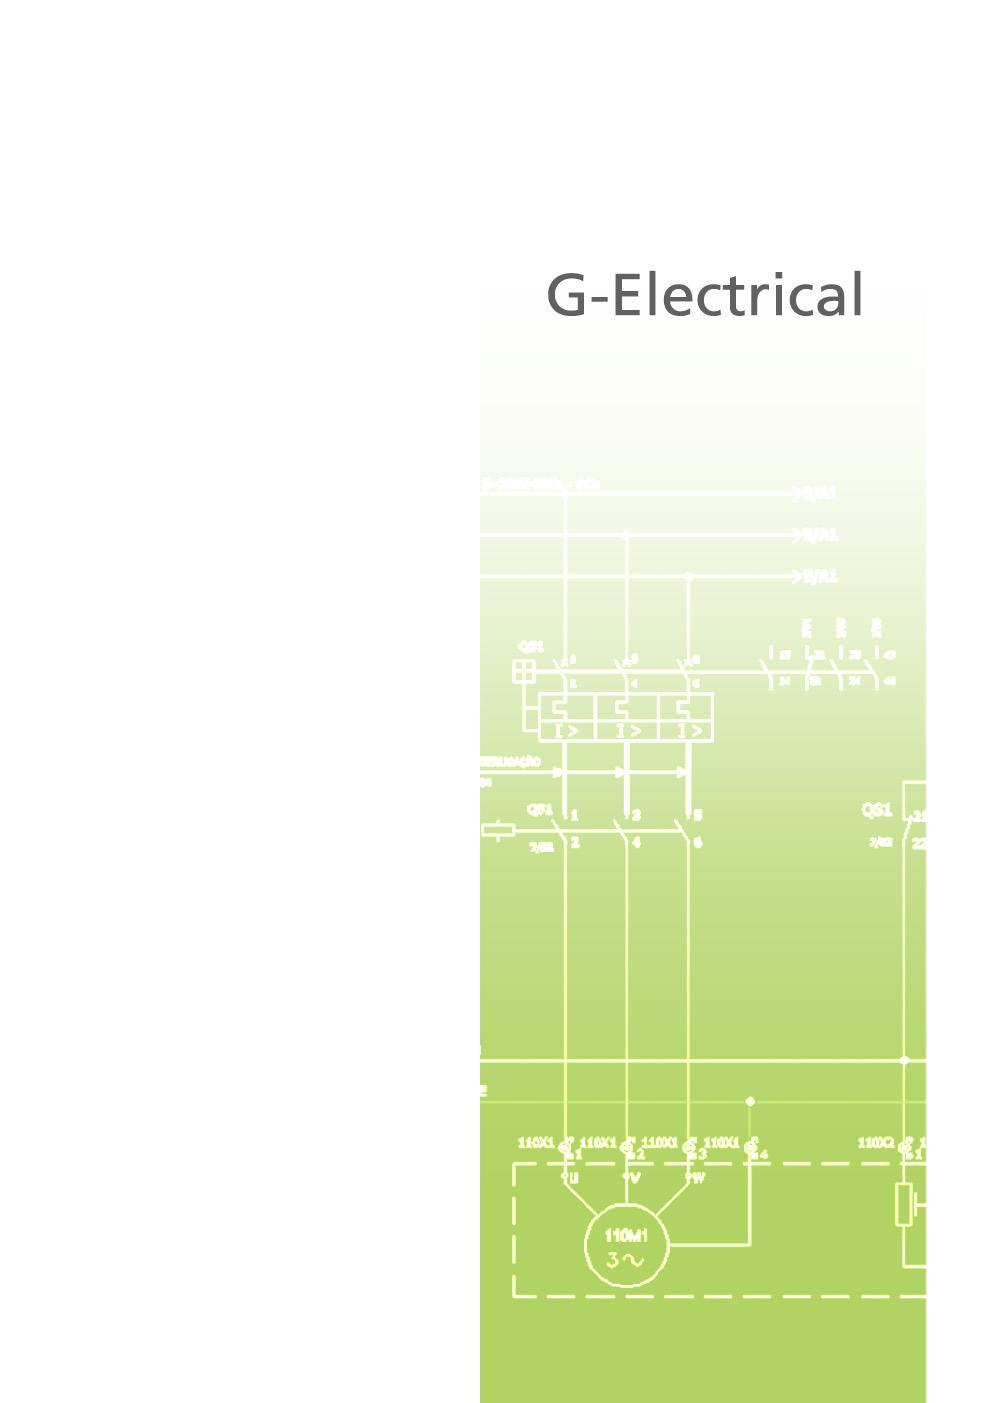 Creating electrical